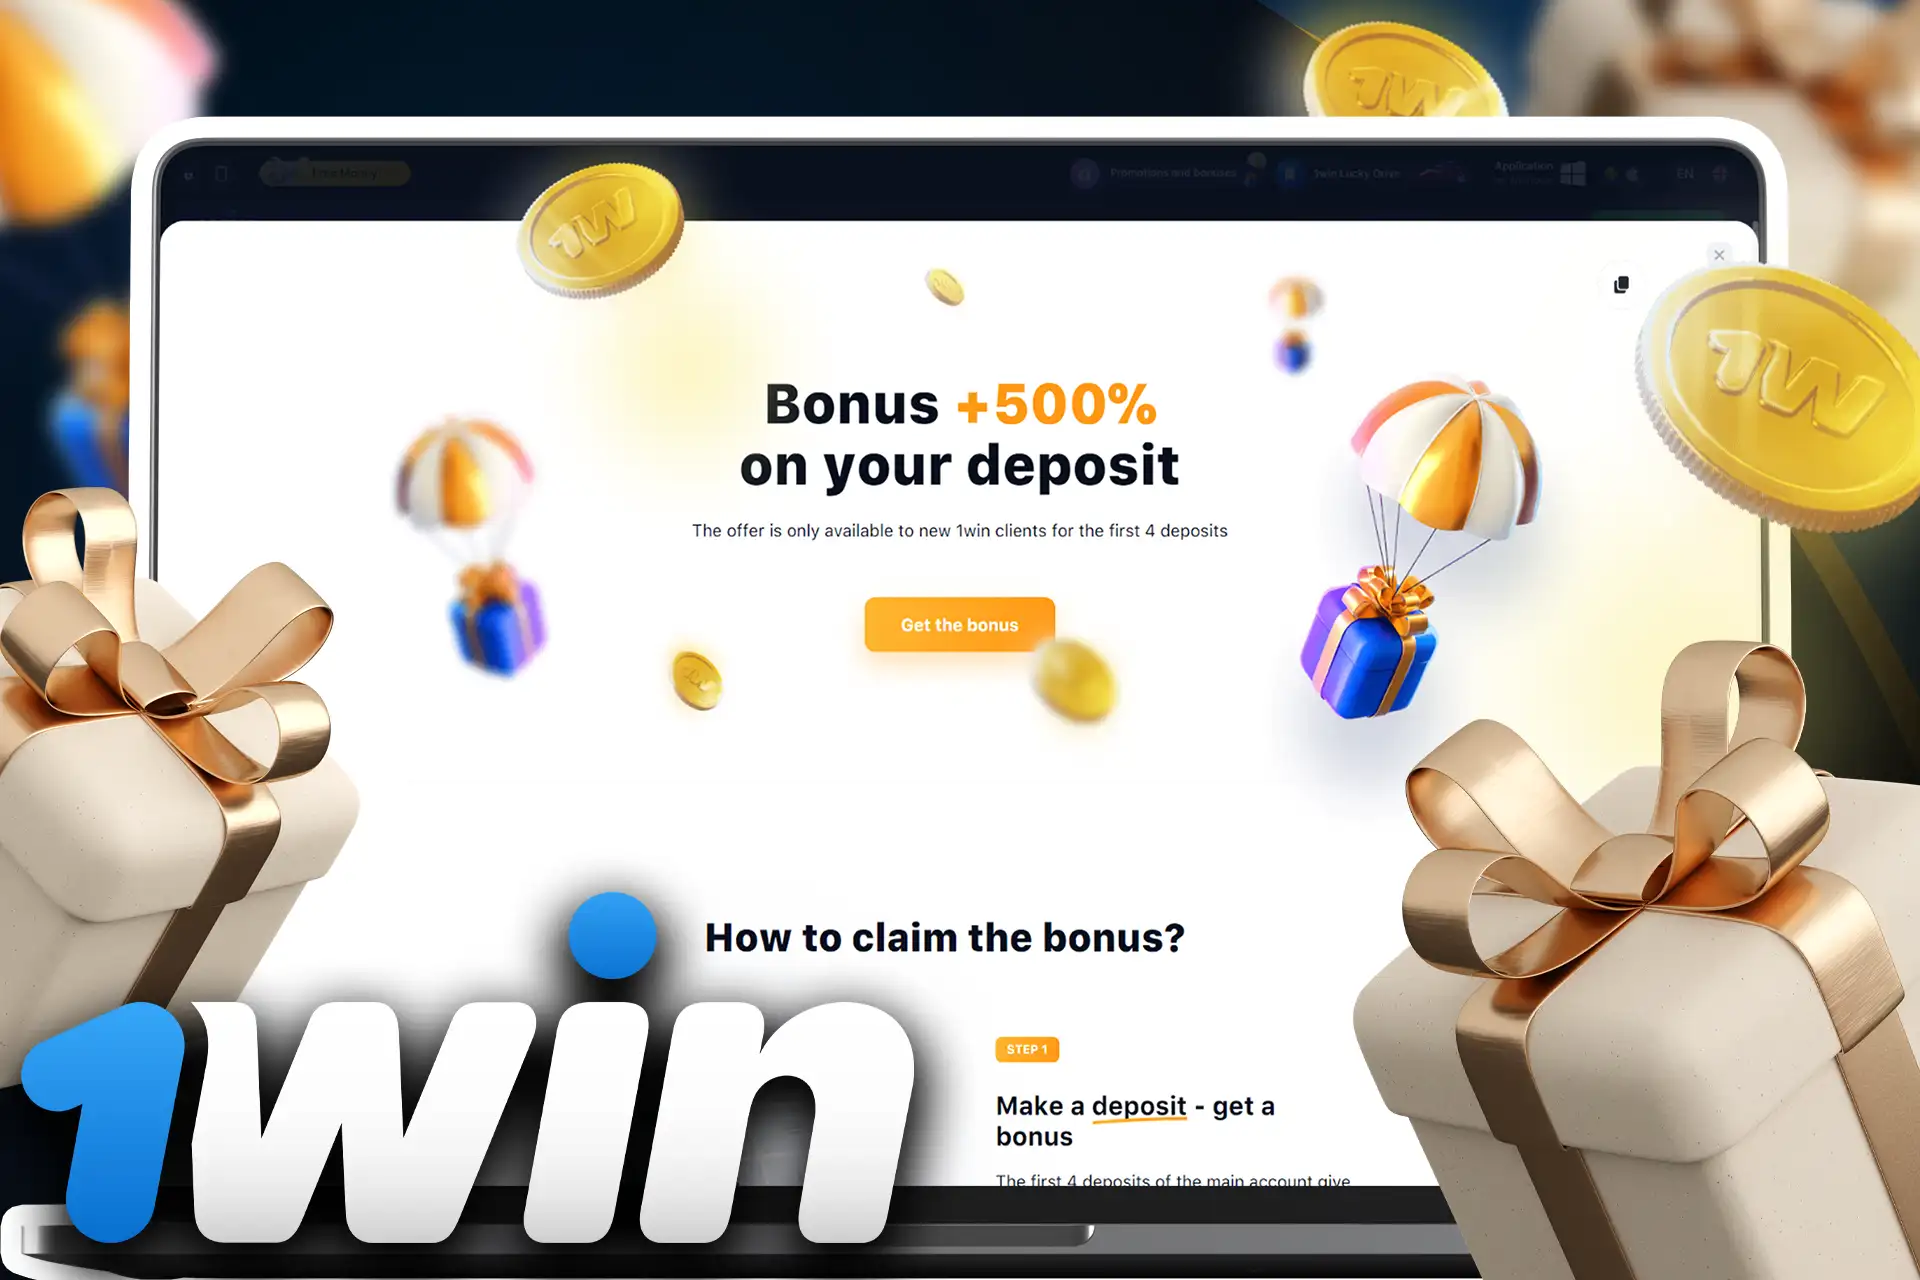 1win Canada is giving a welcome bonus for all new users.